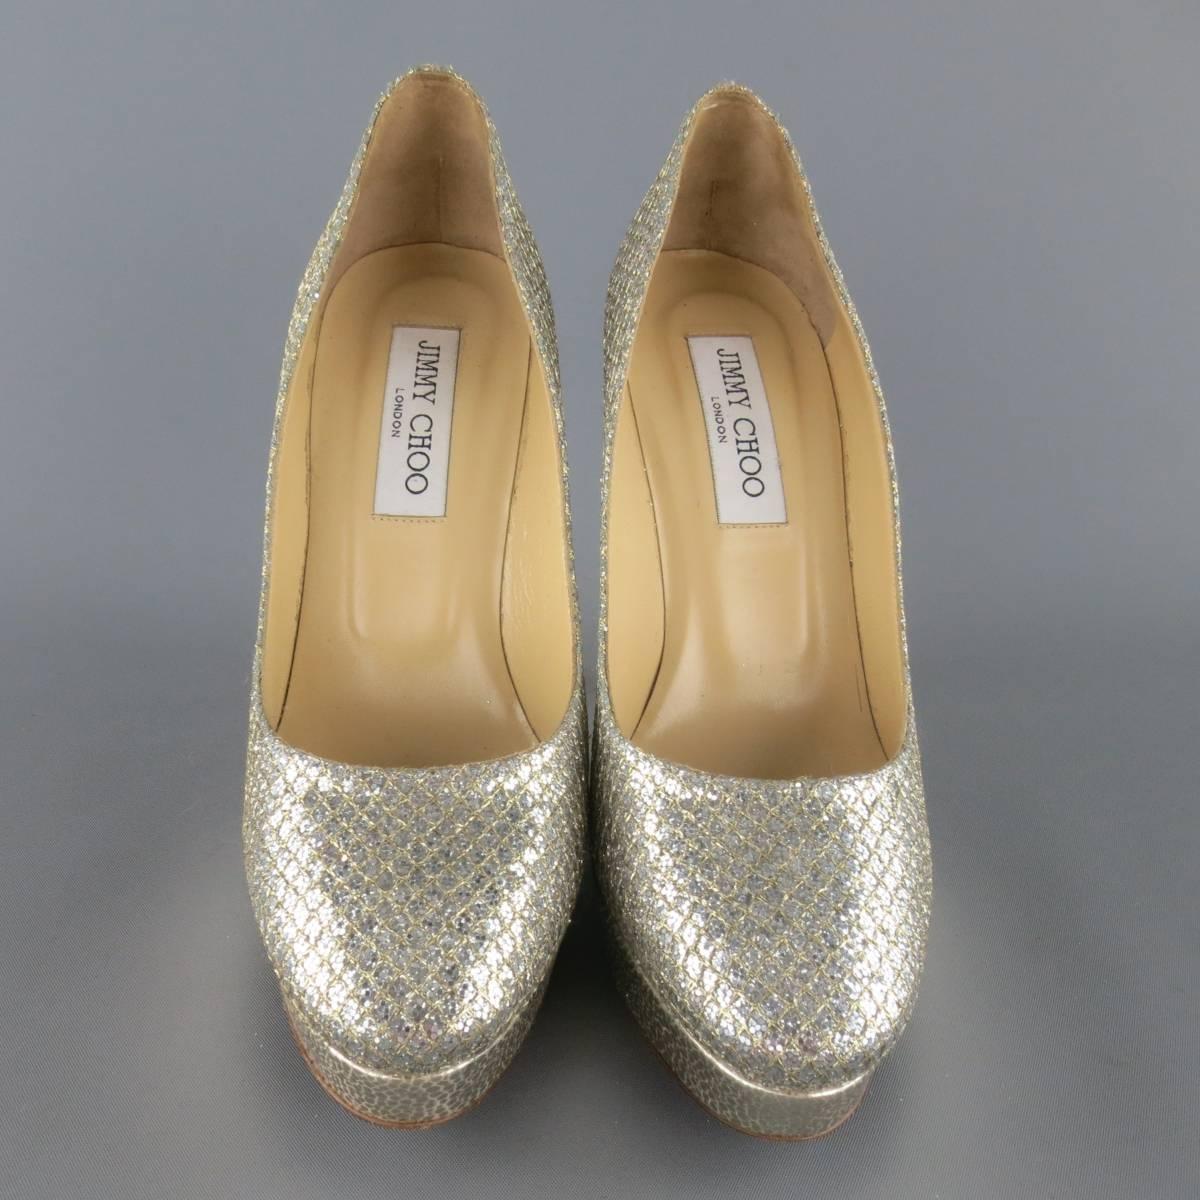 JIMMY CHOO pumps come in a silver glitter encrusted leather with mesh overlay and feature a rounded point toe with metallic silver textured leather platform, covered stiletto heel, and rhinestone 